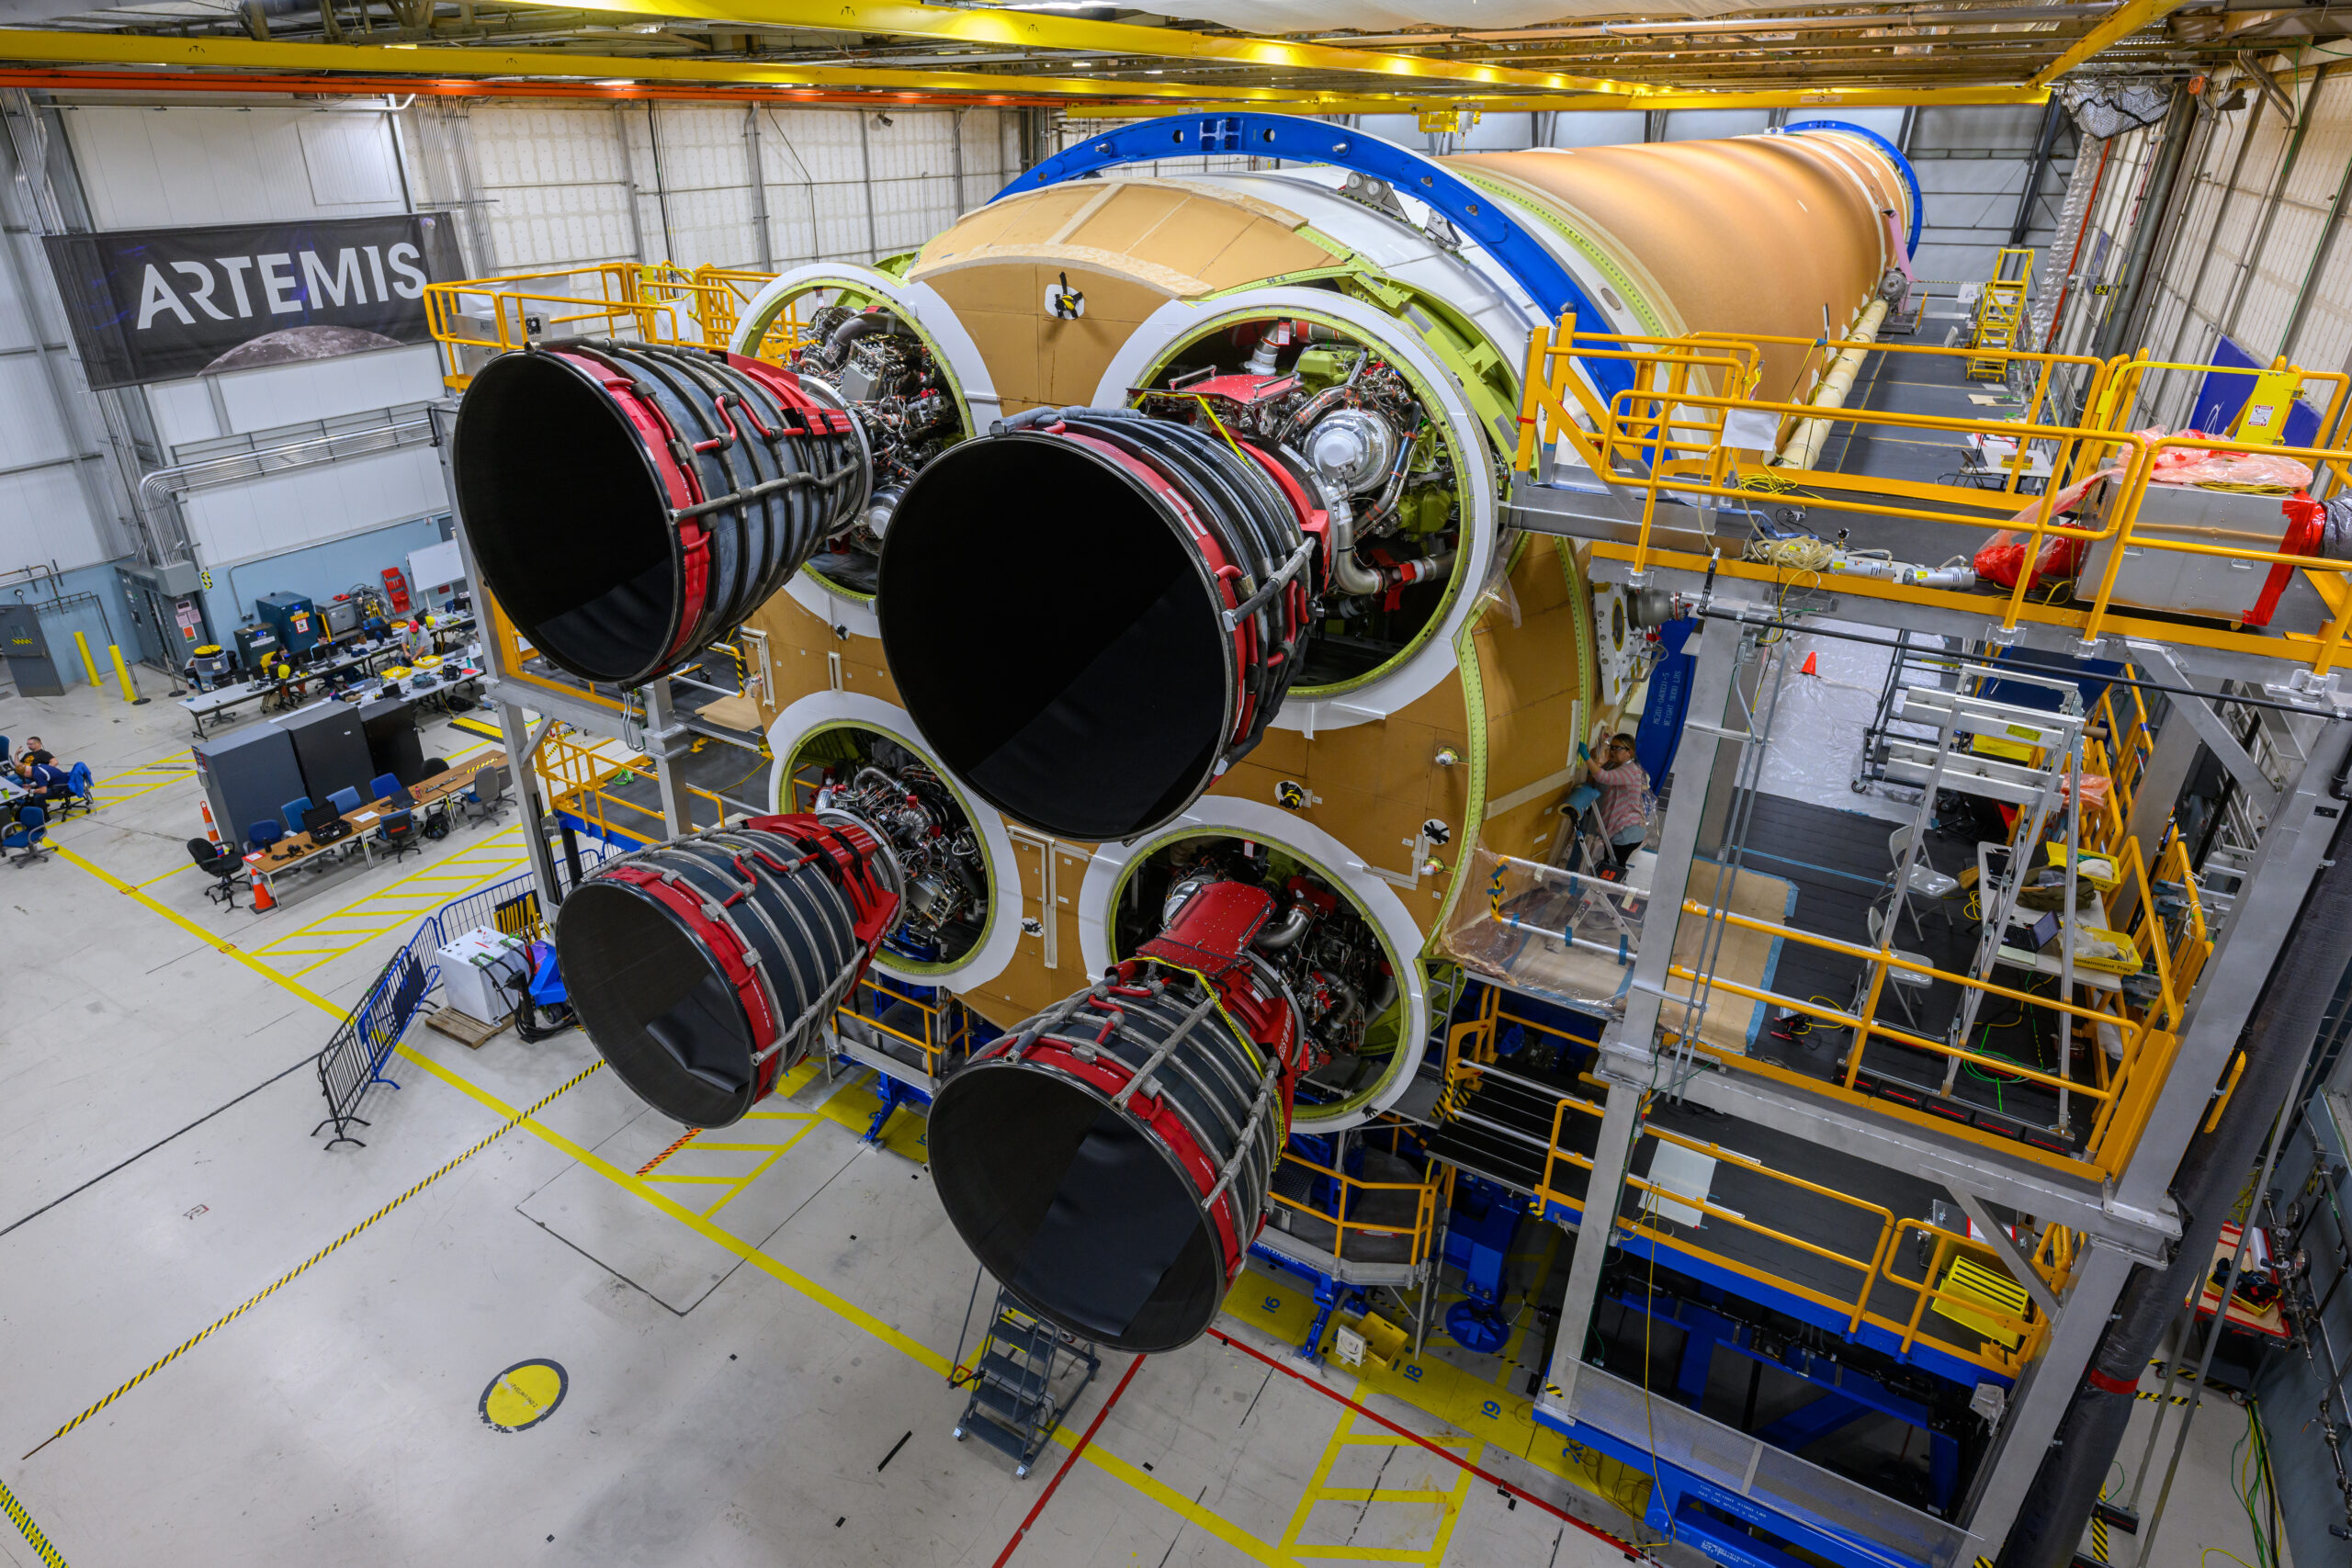 Engineers and technicians from NASA, Aerojet Rocketdyne, and Boeing at NASA's Michoud Assembly Facility in New Orleans have installed all four RS-25 engines to the core stage for NASA's Space Launch System rocket that will help power the first crewed Artemis mission to the Moon. The yellow core stage is seen in a horizontal position in the final assembly area at Michoud. The engines are arranged at the bottom of the rocket stage in a square pattern, like legs on a table.